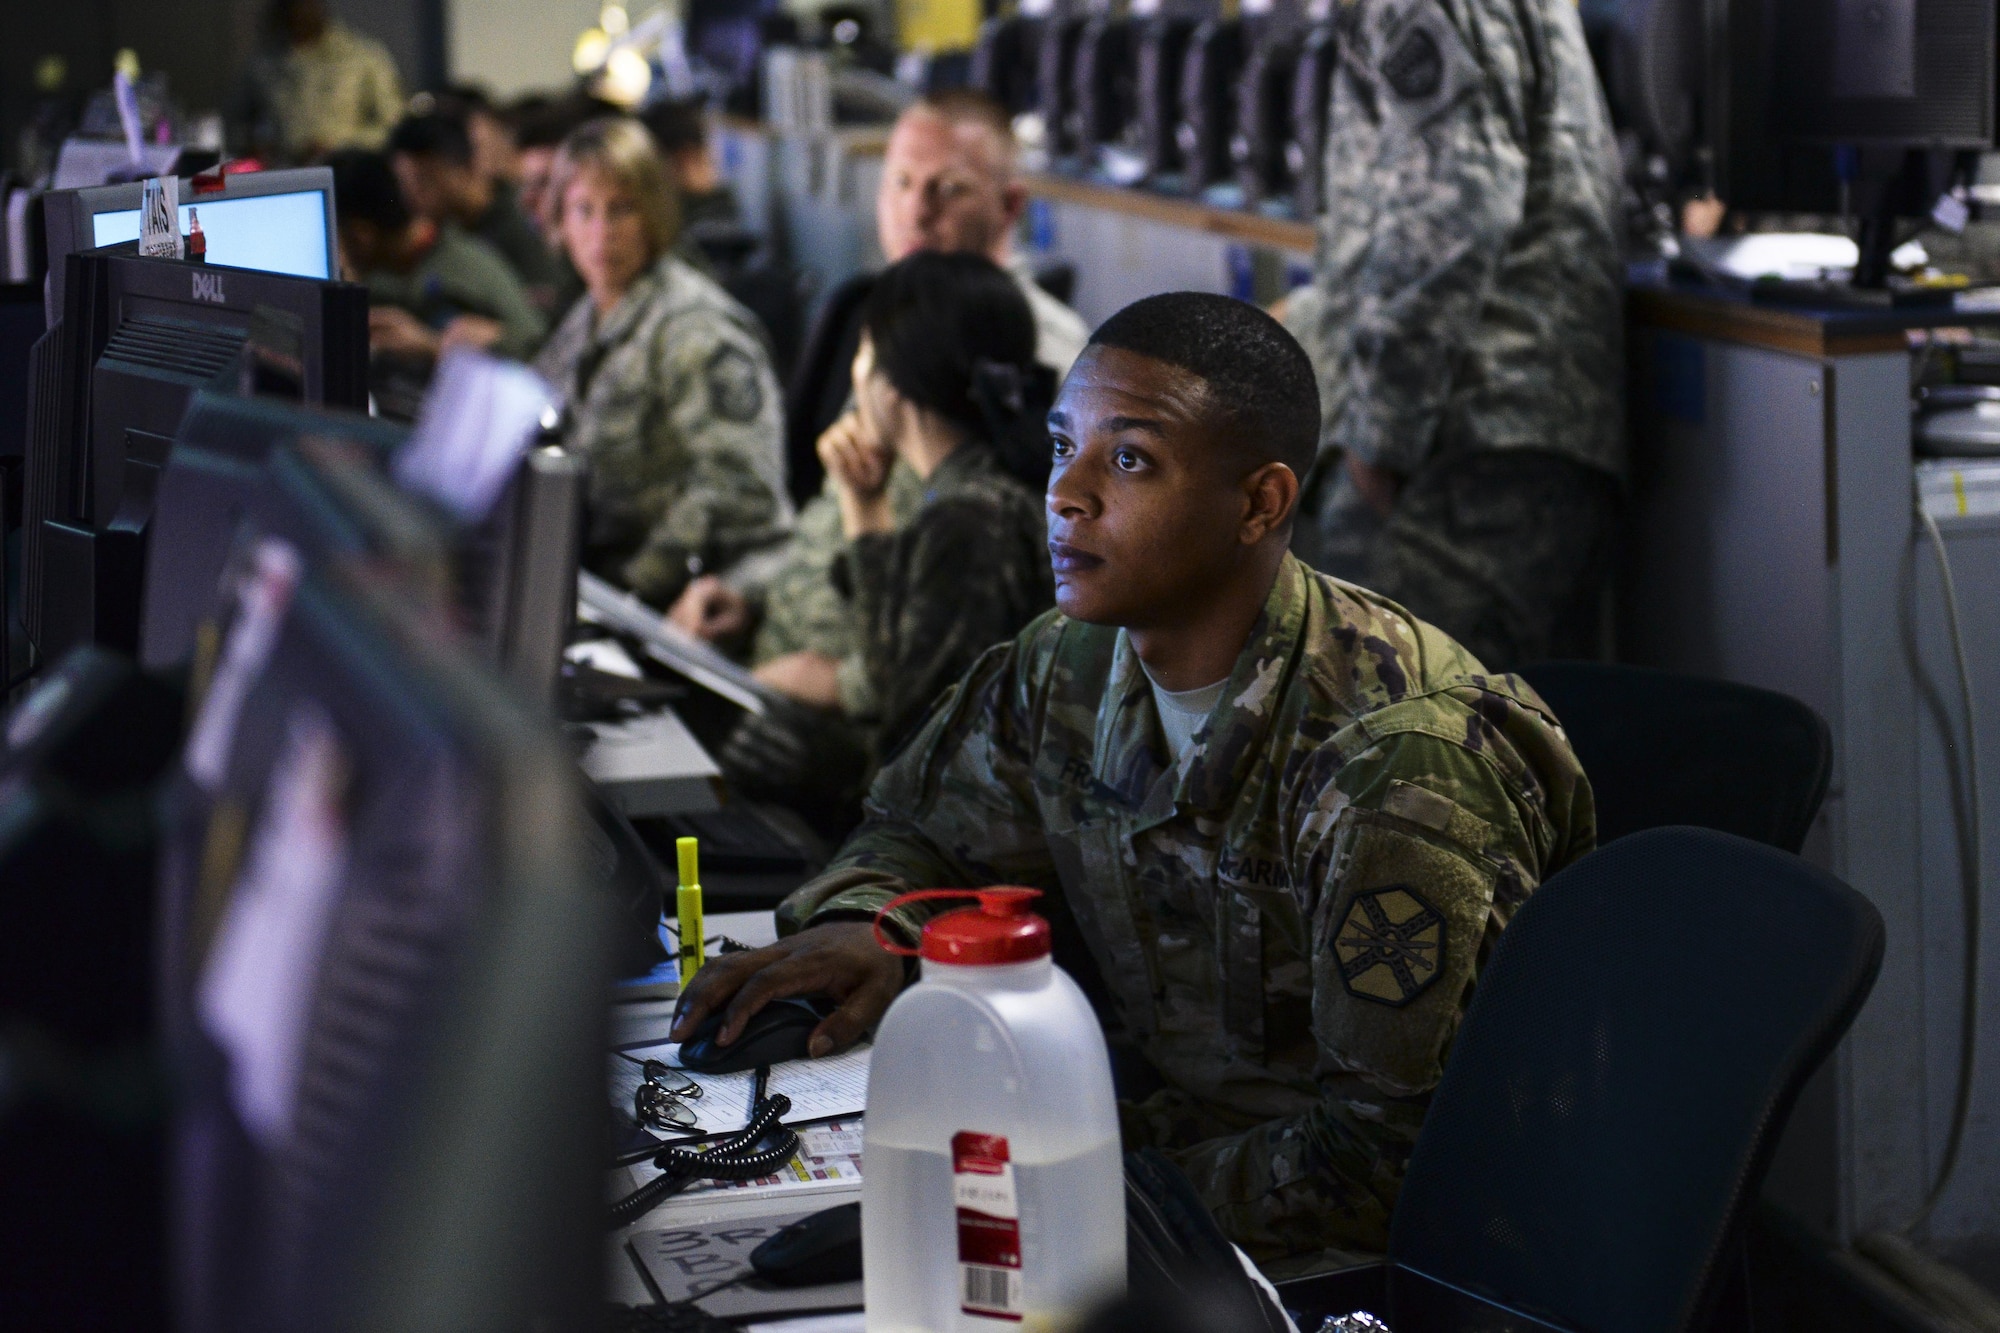 U.S. Army Sgt. Dennis Franklin, Headquarters and Headquarters Company Management Command Yongsan air traffic controller, monitors air space throughout the Indo-Asian-Pacific region at the Hardened Theater Air Control Center, Osan Air Base, Republic of Korea, during the first day of Ulchi Freedom Guardian, Aug. 17, 2015. Approximately 33,000 Airmen, Soldiers, Sailors and Marines from Osan, the Pacific theater and the United States along with other allied militaries are participating in the annual exercise in an effort to enhance the combat readiness of the ROK and U.S. forces. Months of planning went into UFG, preparing joint teams on the operations floor to work together and maximize their collaborated efforts. Portions of the image were blurred for security concerns. (U.S. Air Force illustration by Airman 1st Class John Linzmeier/Released)